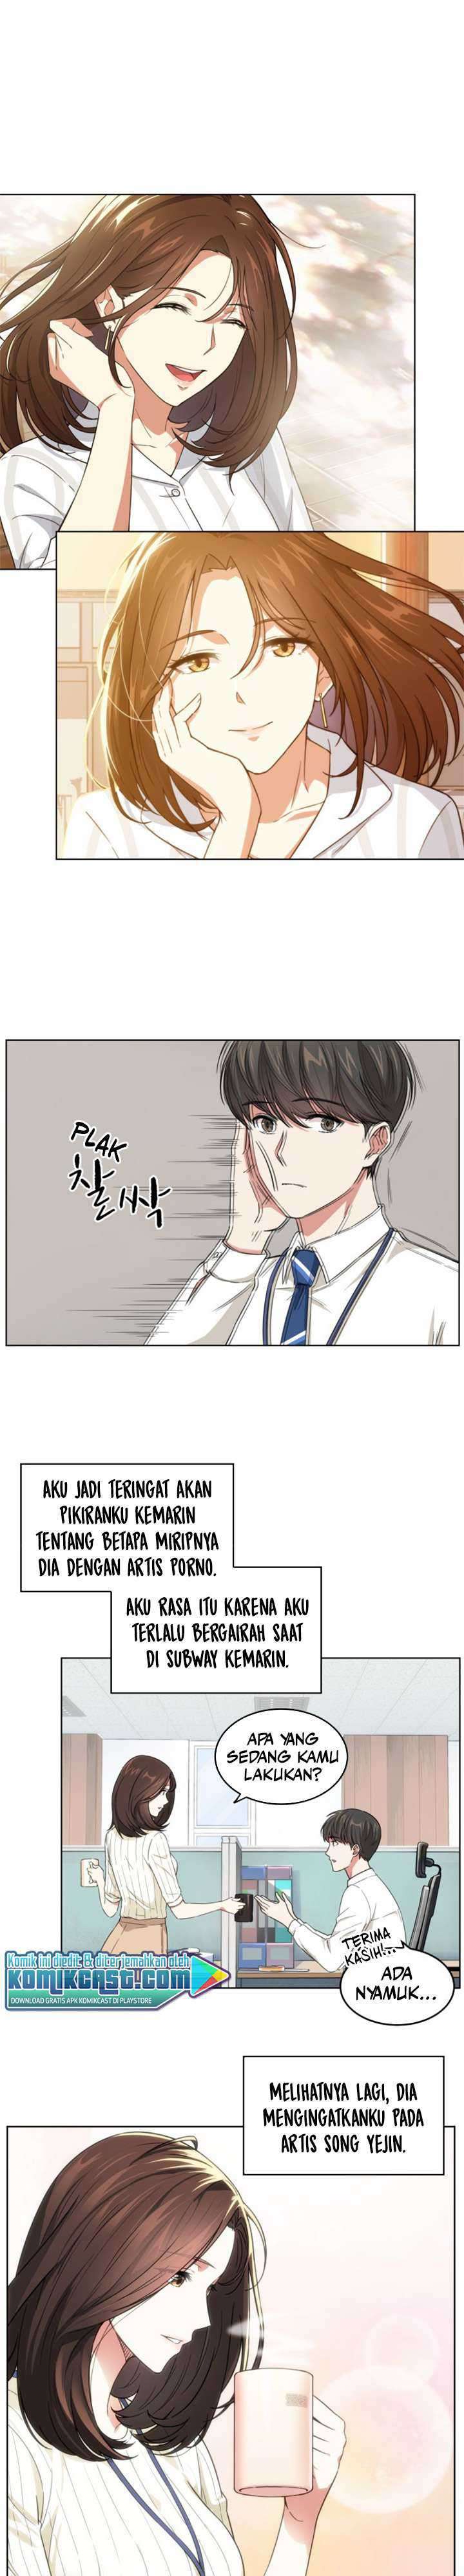 My Office Noona’s Story Chapter 3